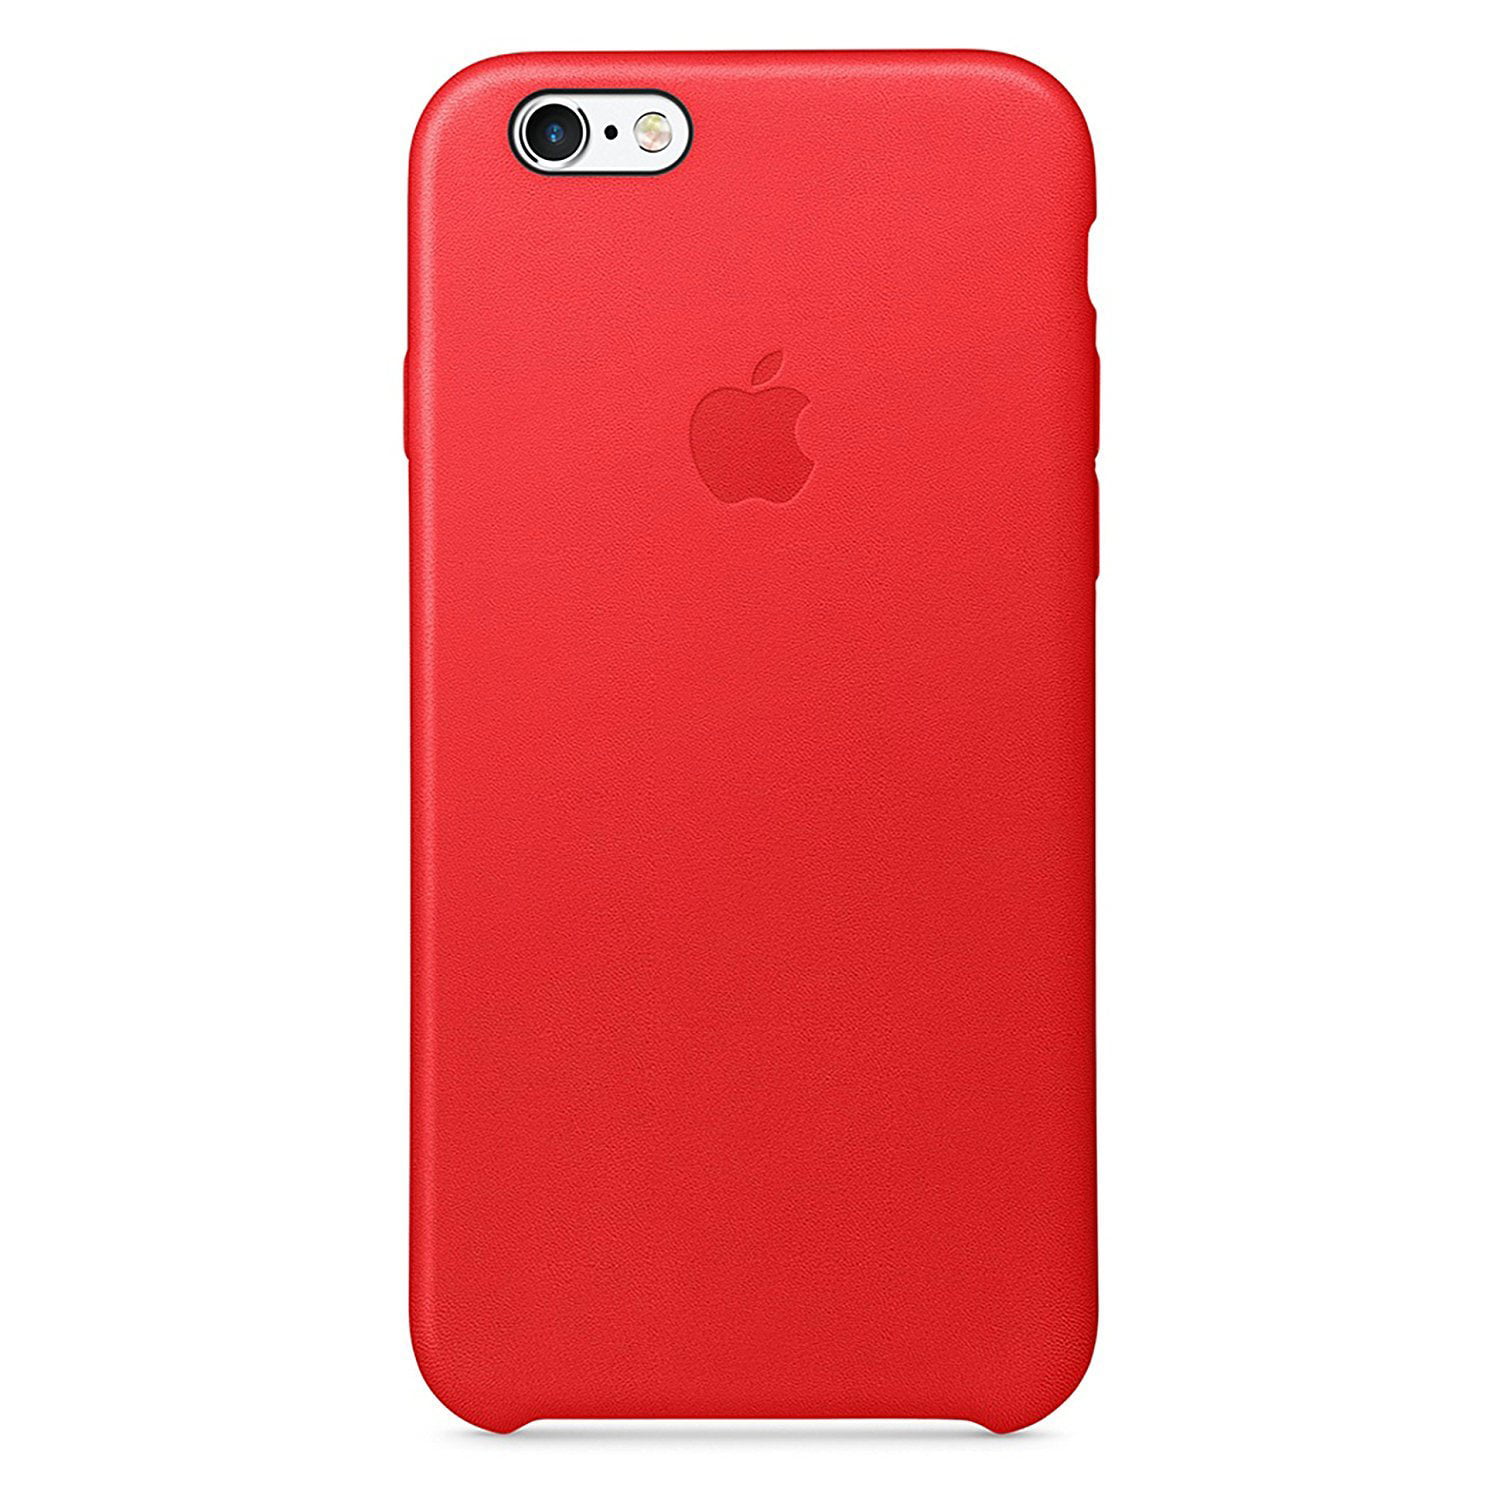 naar voren gebracht toernooi Uitgaan Apple Cell Phone Case for iPhone 6 & 6s Only - Retail Packaging - Leather  Red - Walmart.com